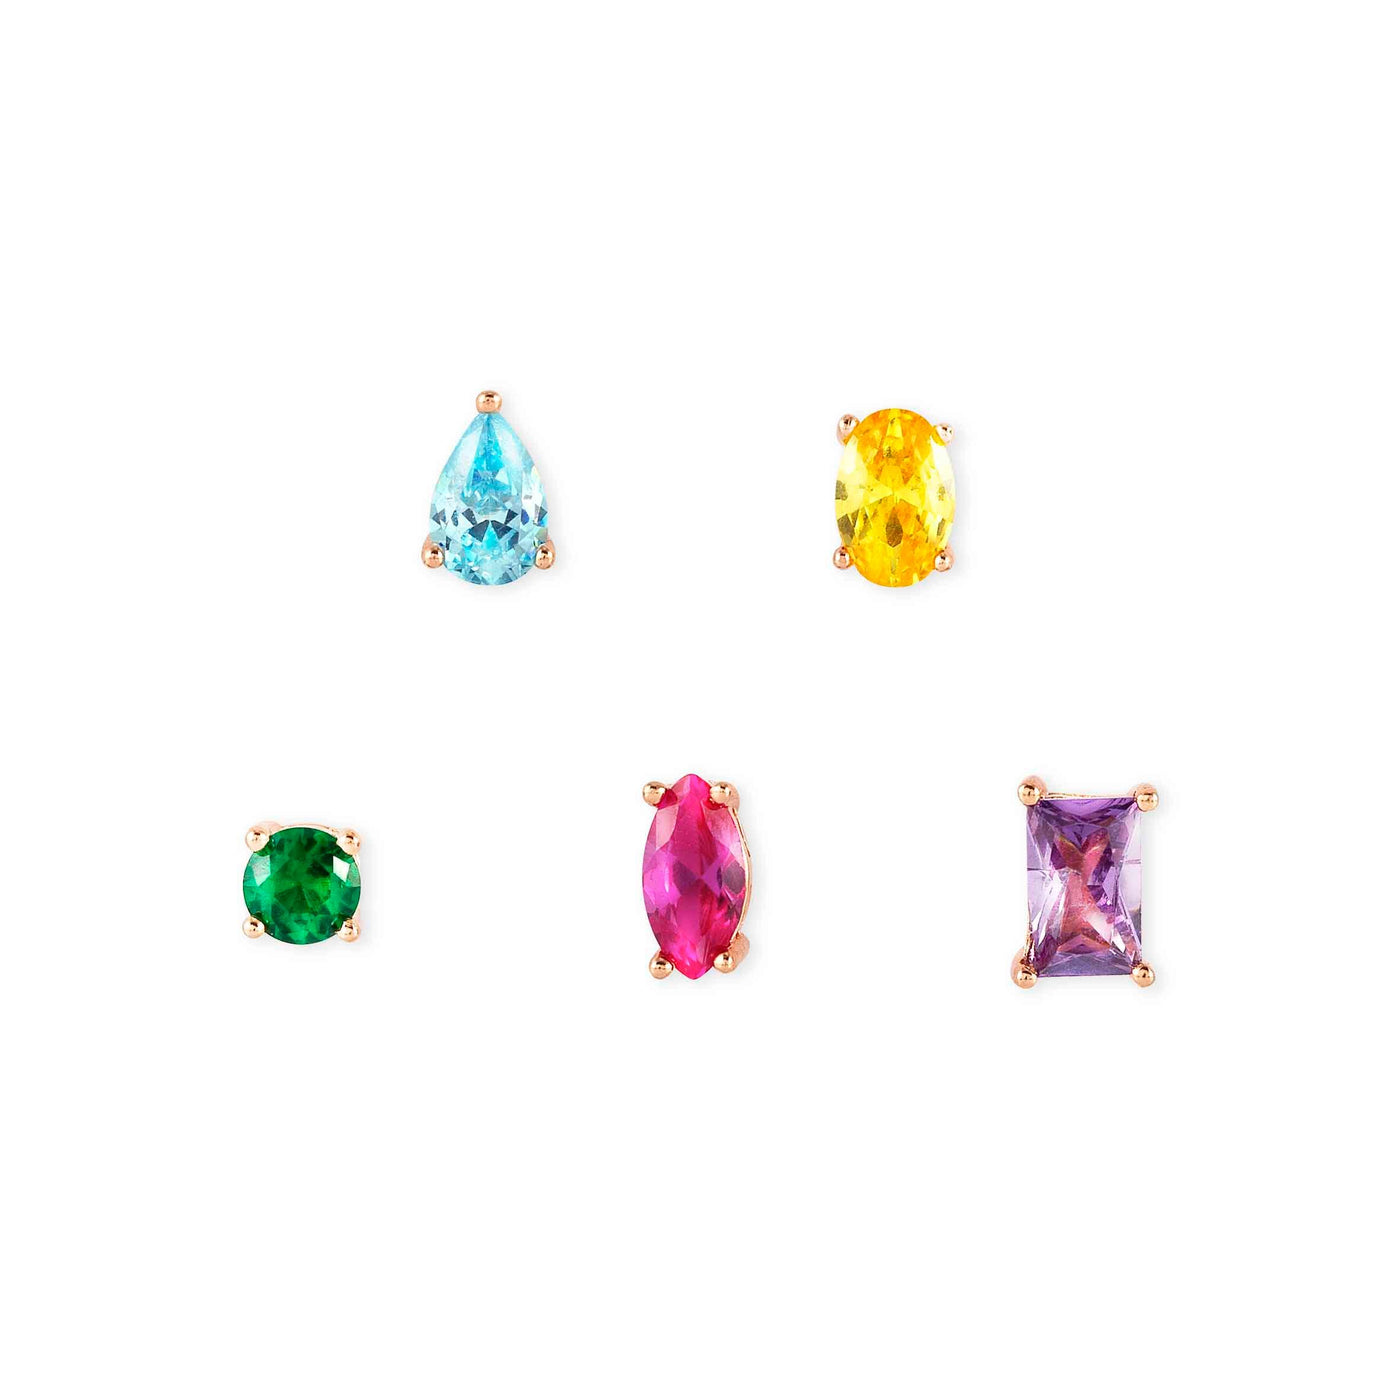 Nomination Colour Wave Stud Earrings - Set of 5 Singles - Rococo Jewellery